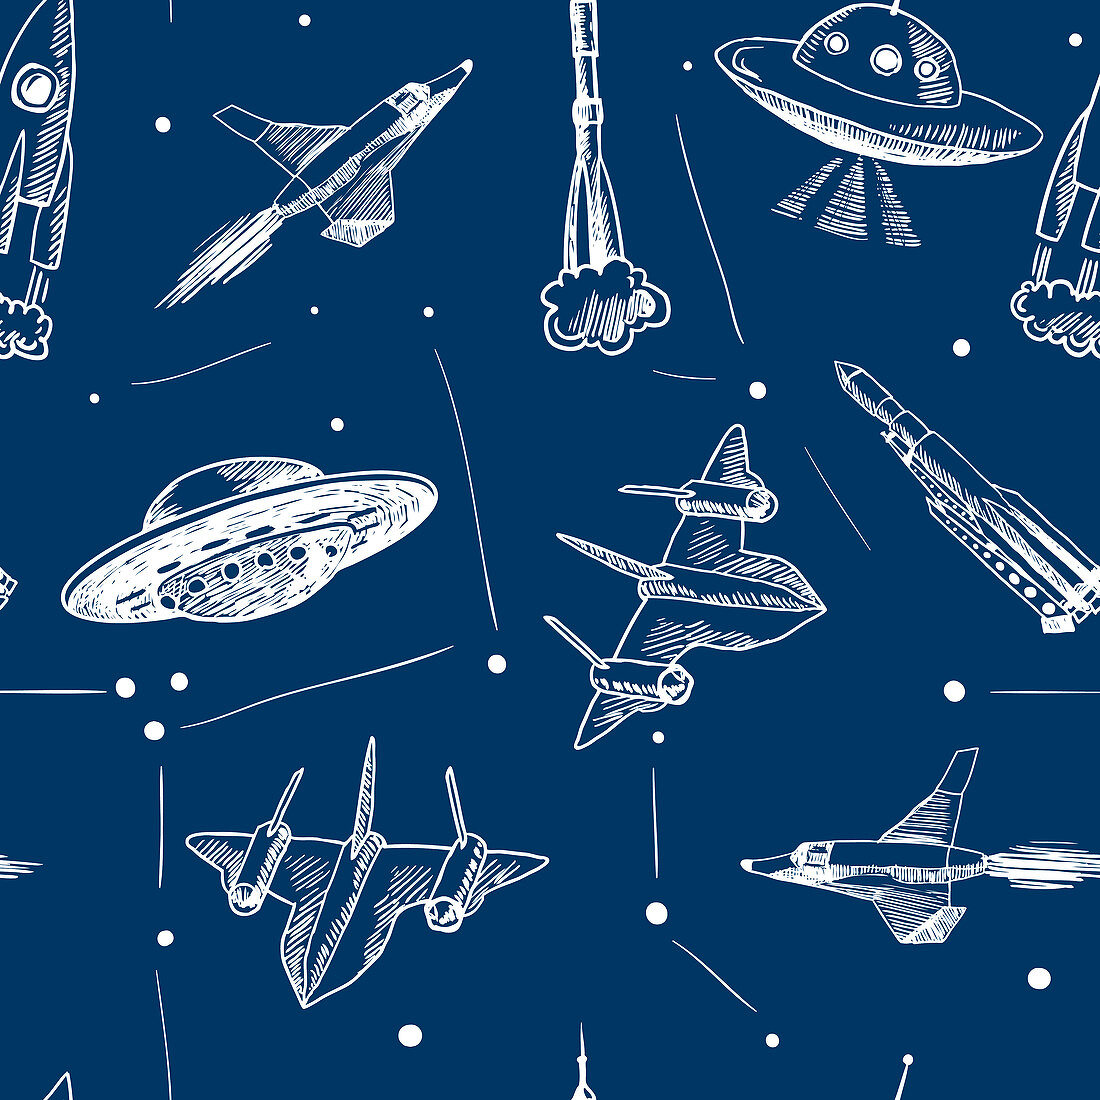 Spaceships and UFOs, illustration